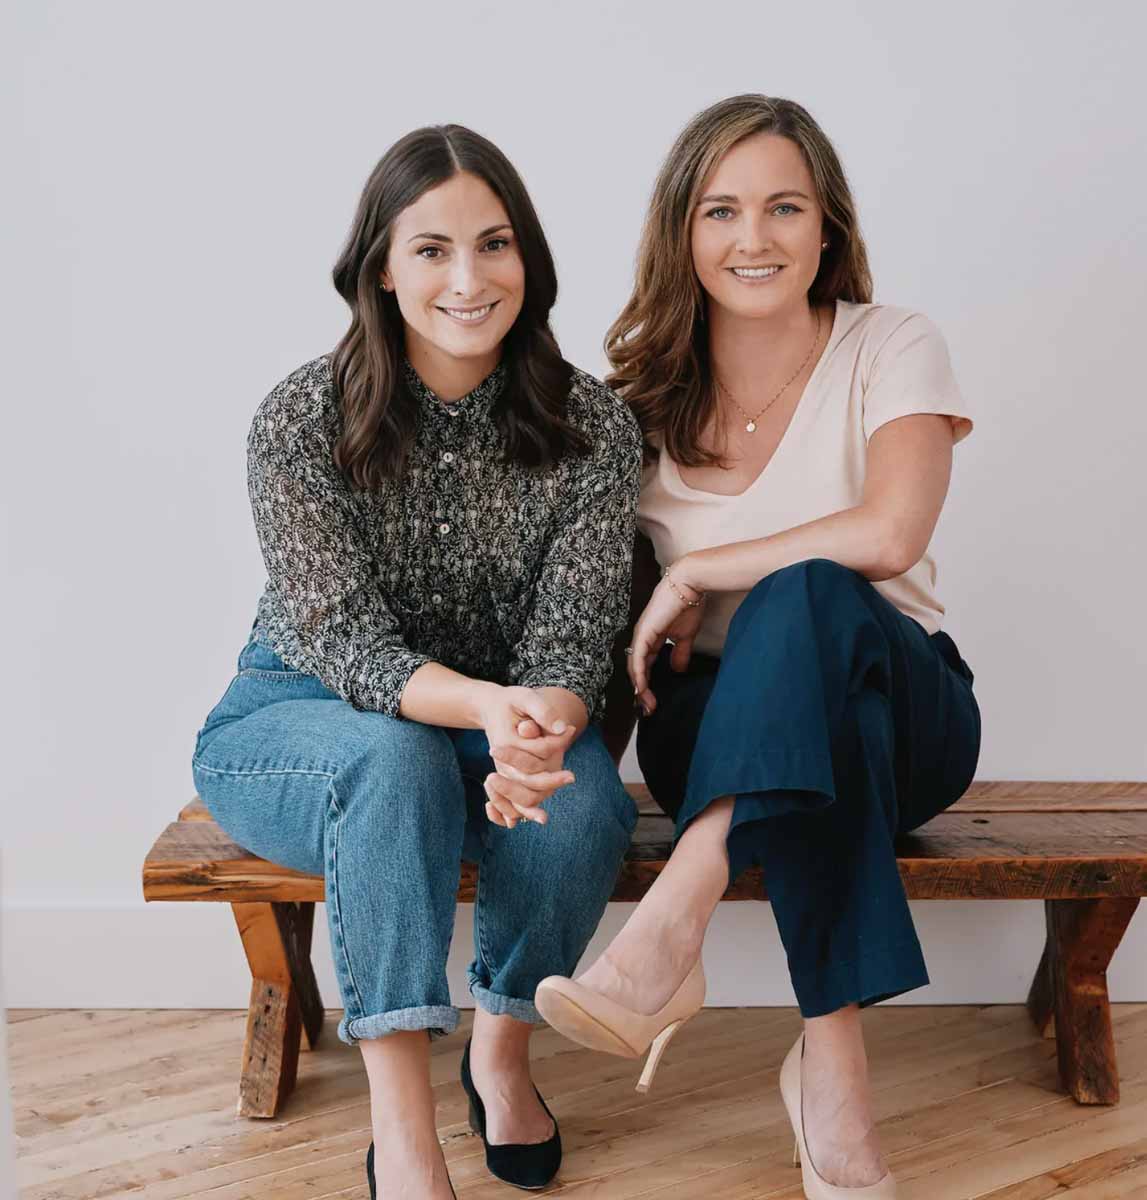 Founders of Everist, a small brand making plant-based and plastic-free shampoo, conditioner, and body wash.